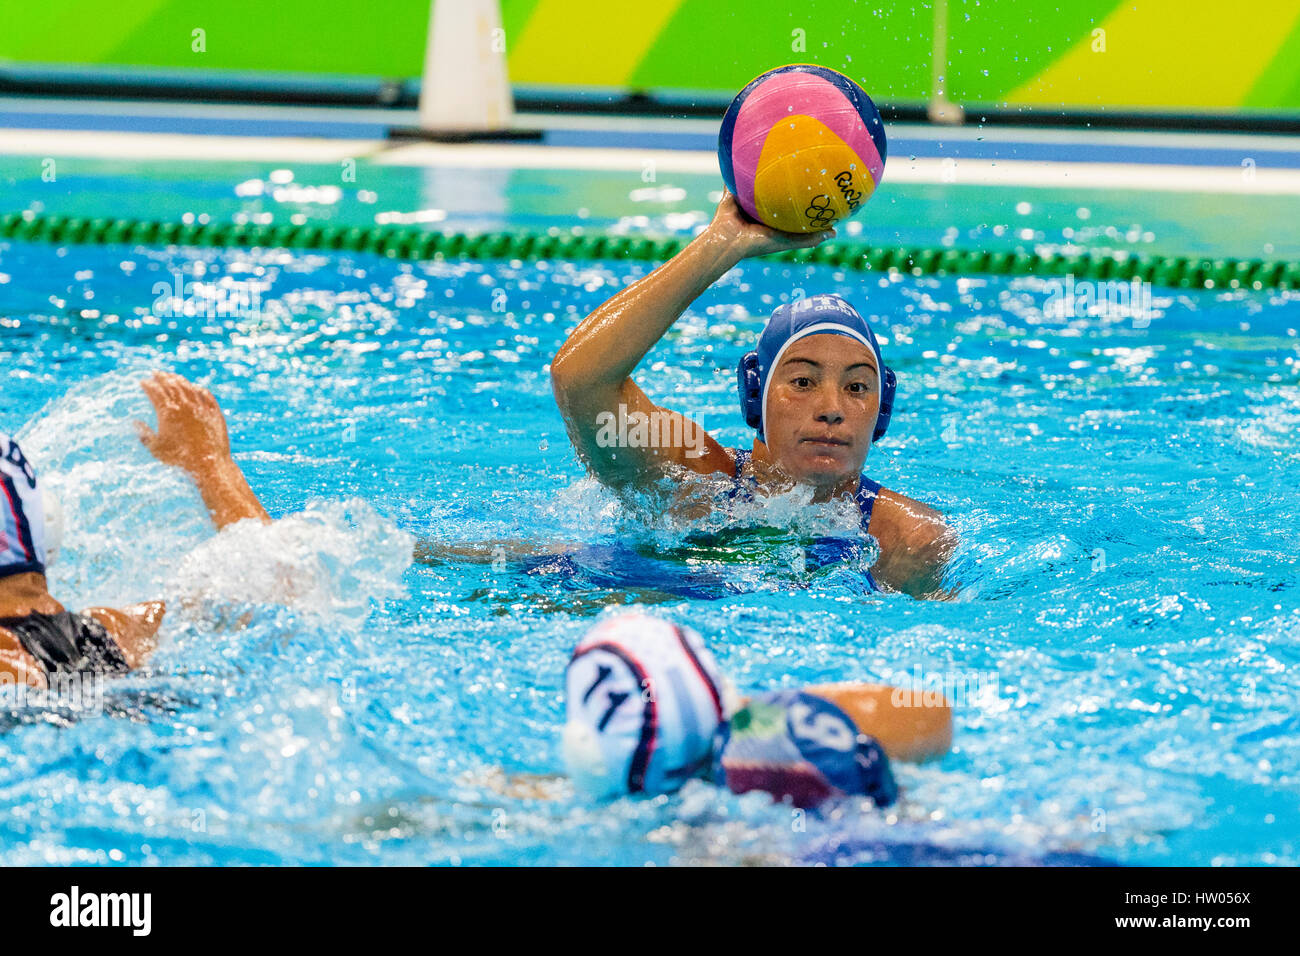 Rio de Janeiro, Brazil. 19 August 2016  Roberta Bianconi (ITA) competes in the women's water polo gold medal match vs. USA at the 2016 Olympic Summer  Stock Photo